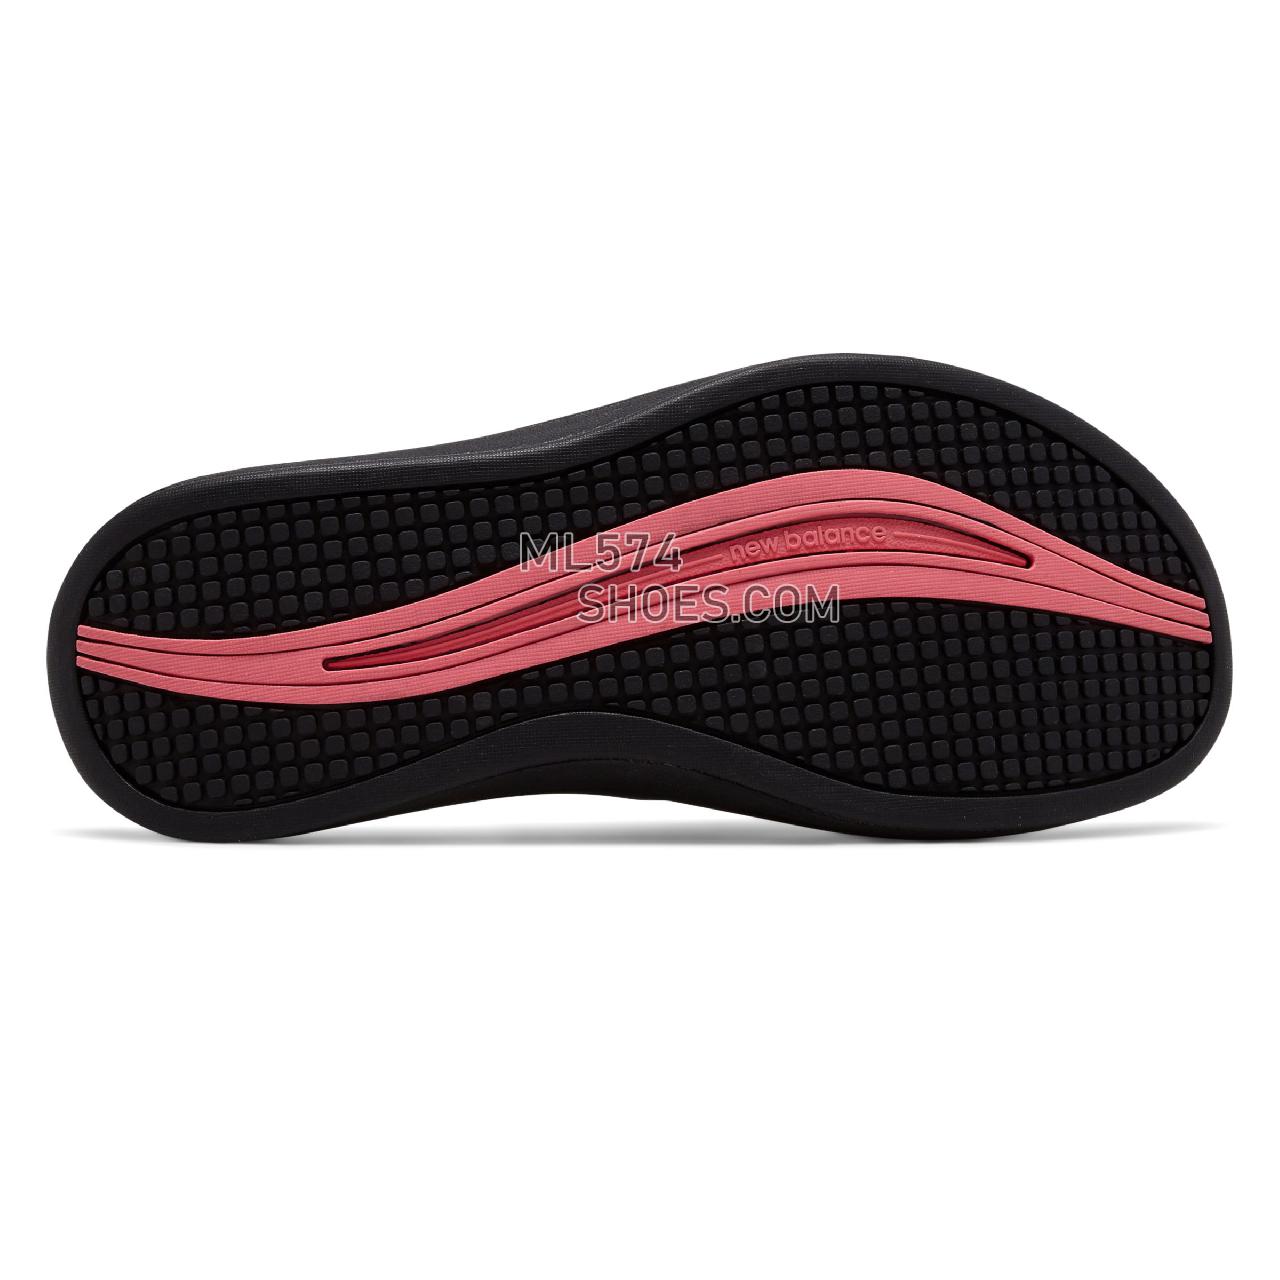 New Balance Revive Sport Thong - Women's 6087 - Sandals Black with Pink Zing - W6087BKI